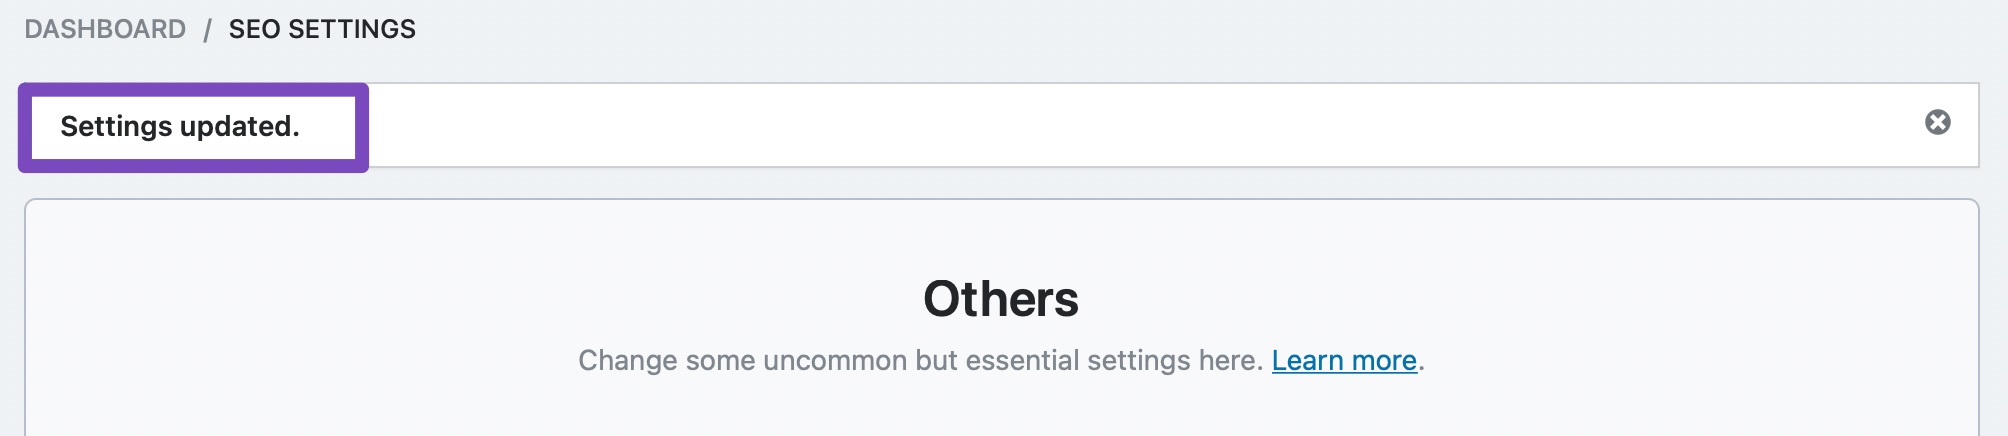 settings updated confirmation